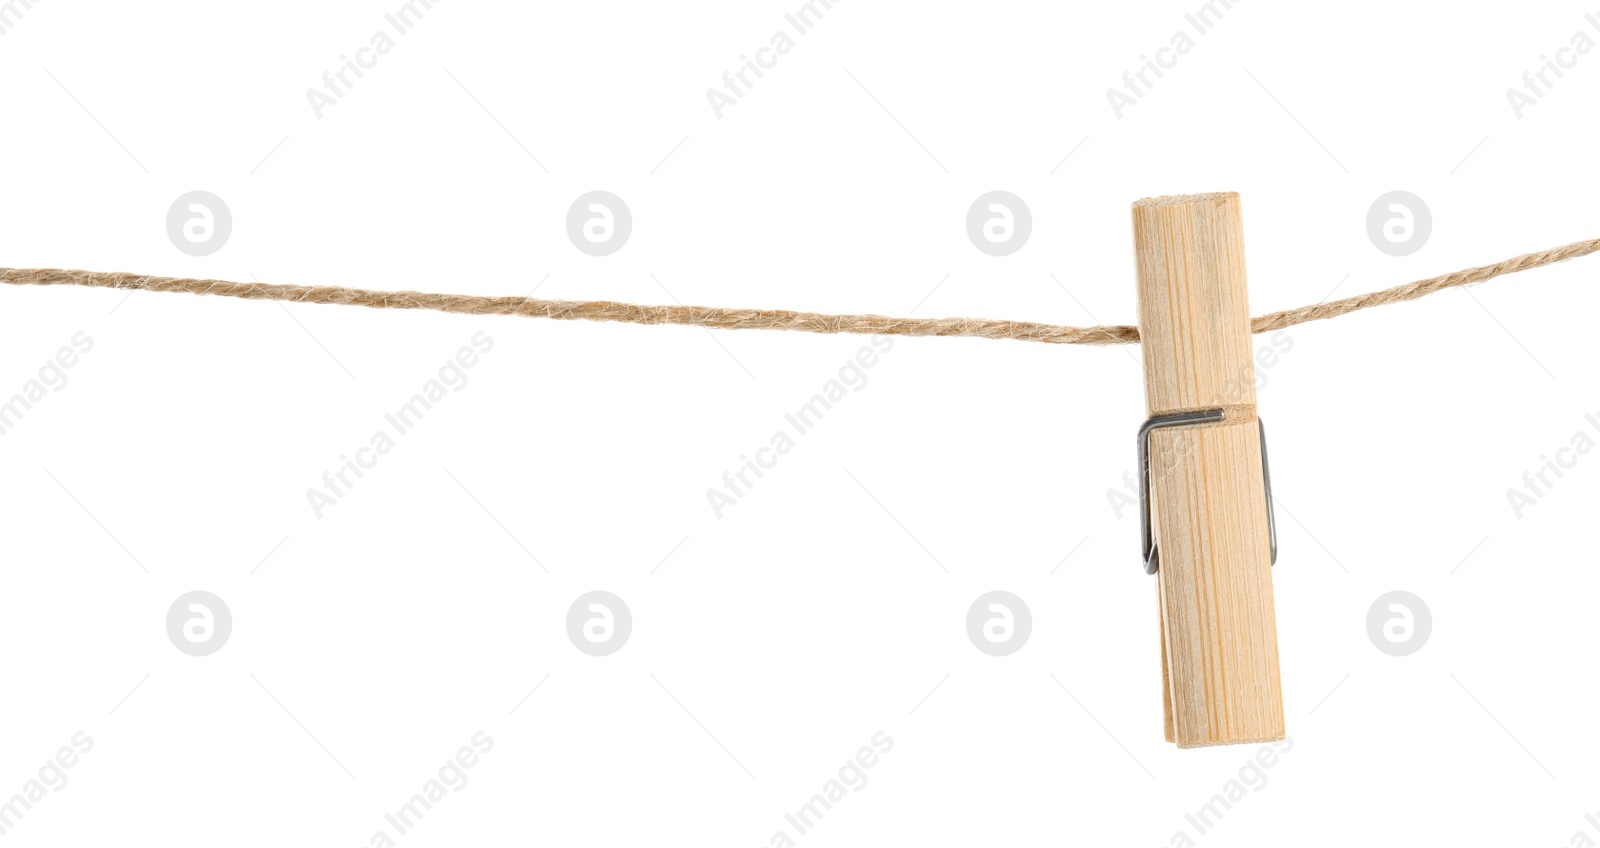 Photo of Wooden clothespin on rope against white background